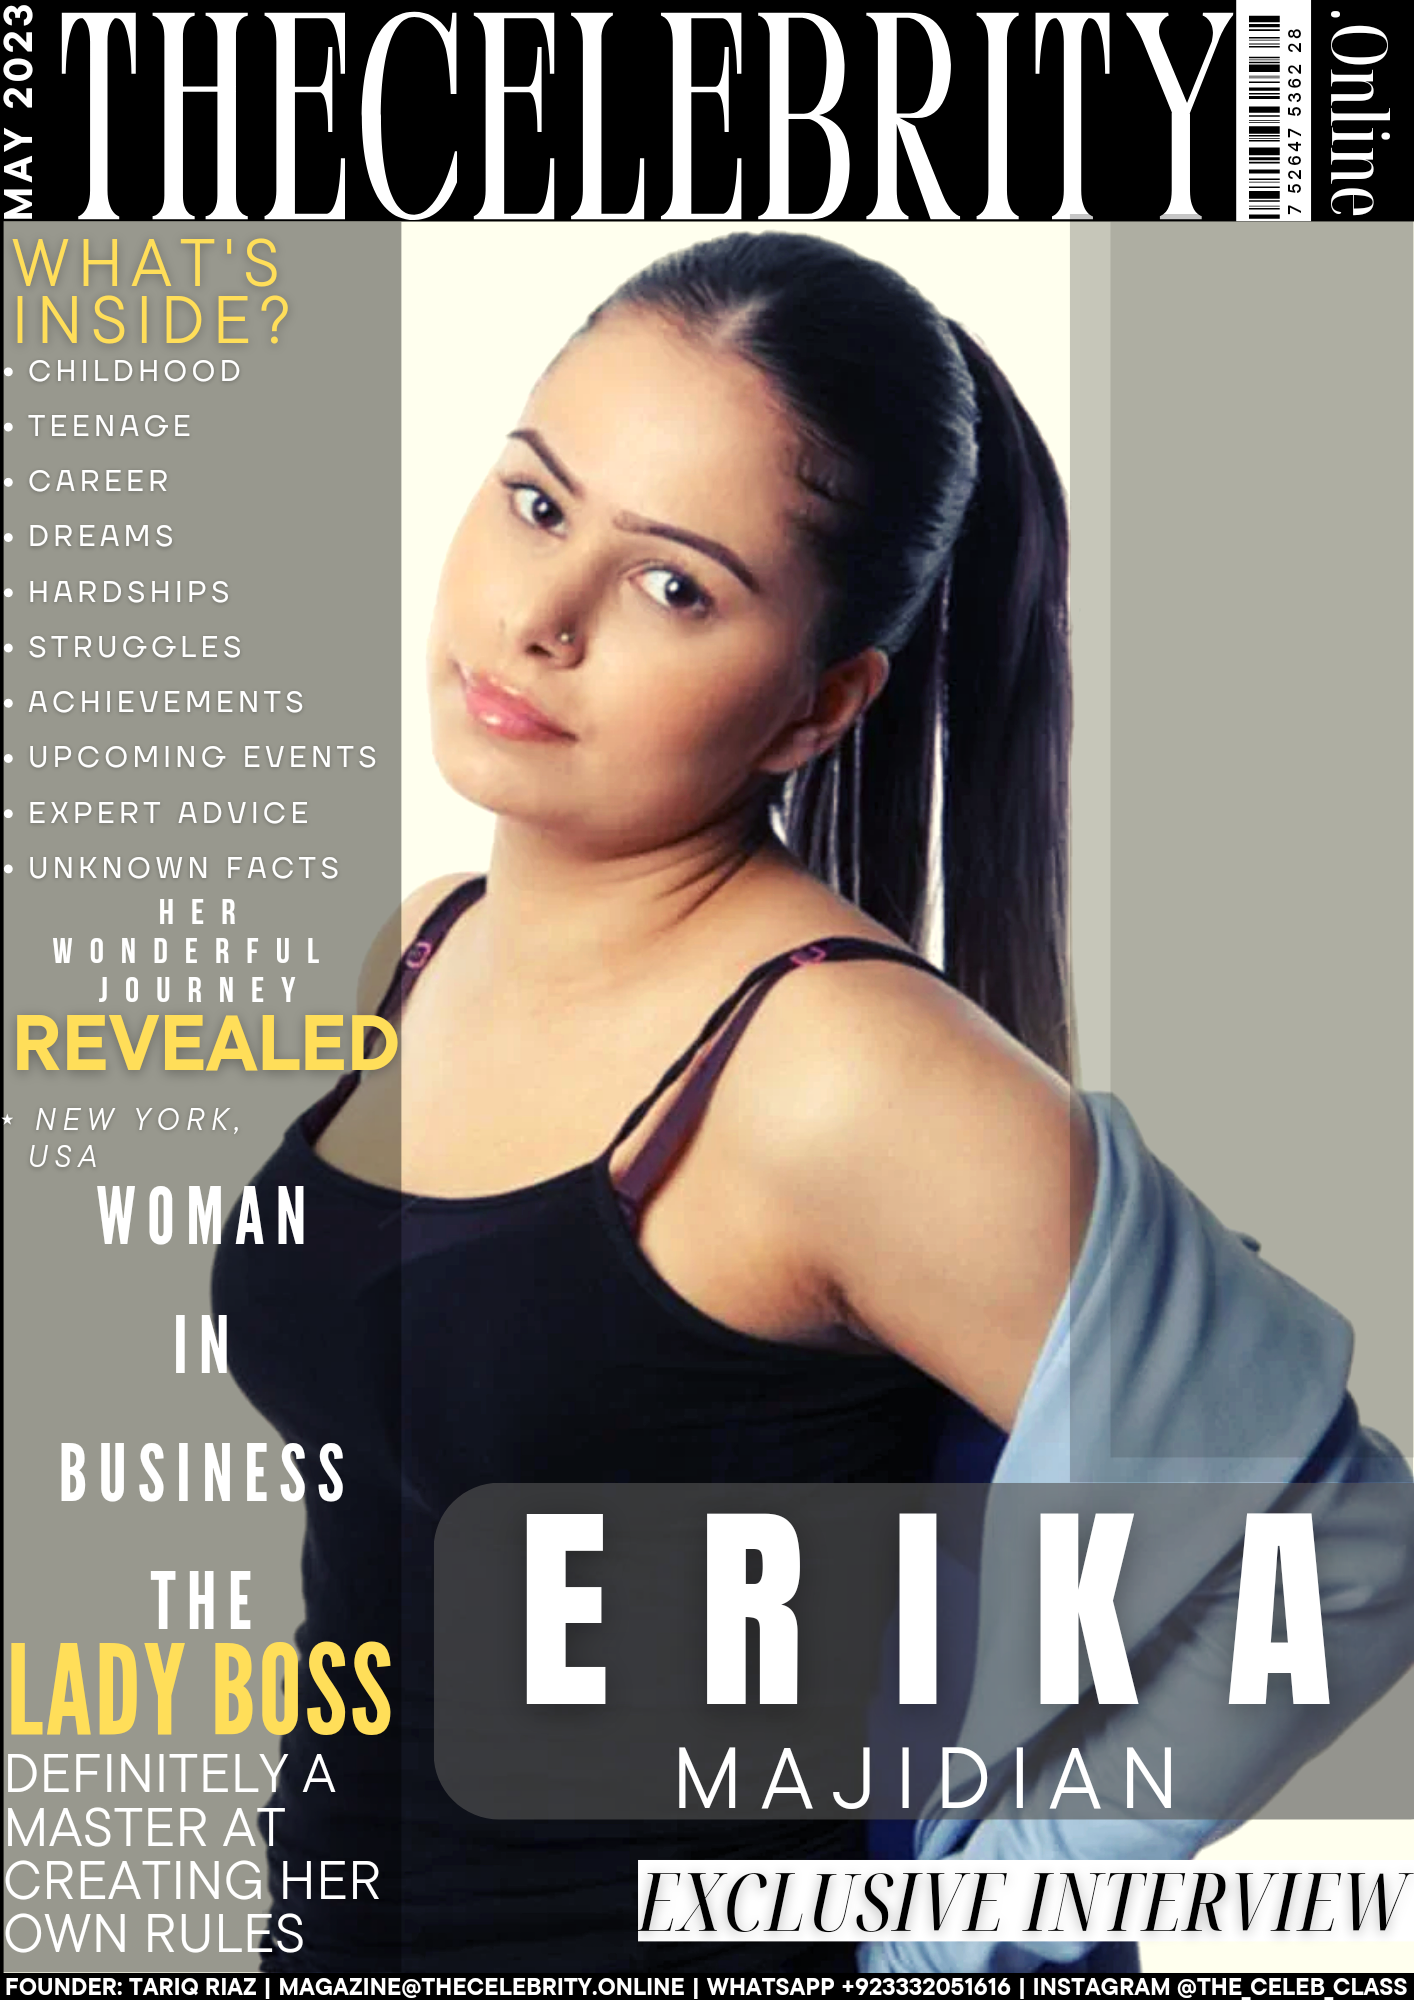 Erika Majidian Exclusive Interview – ‘Influence and Encourage Others To Come out of their Shells’